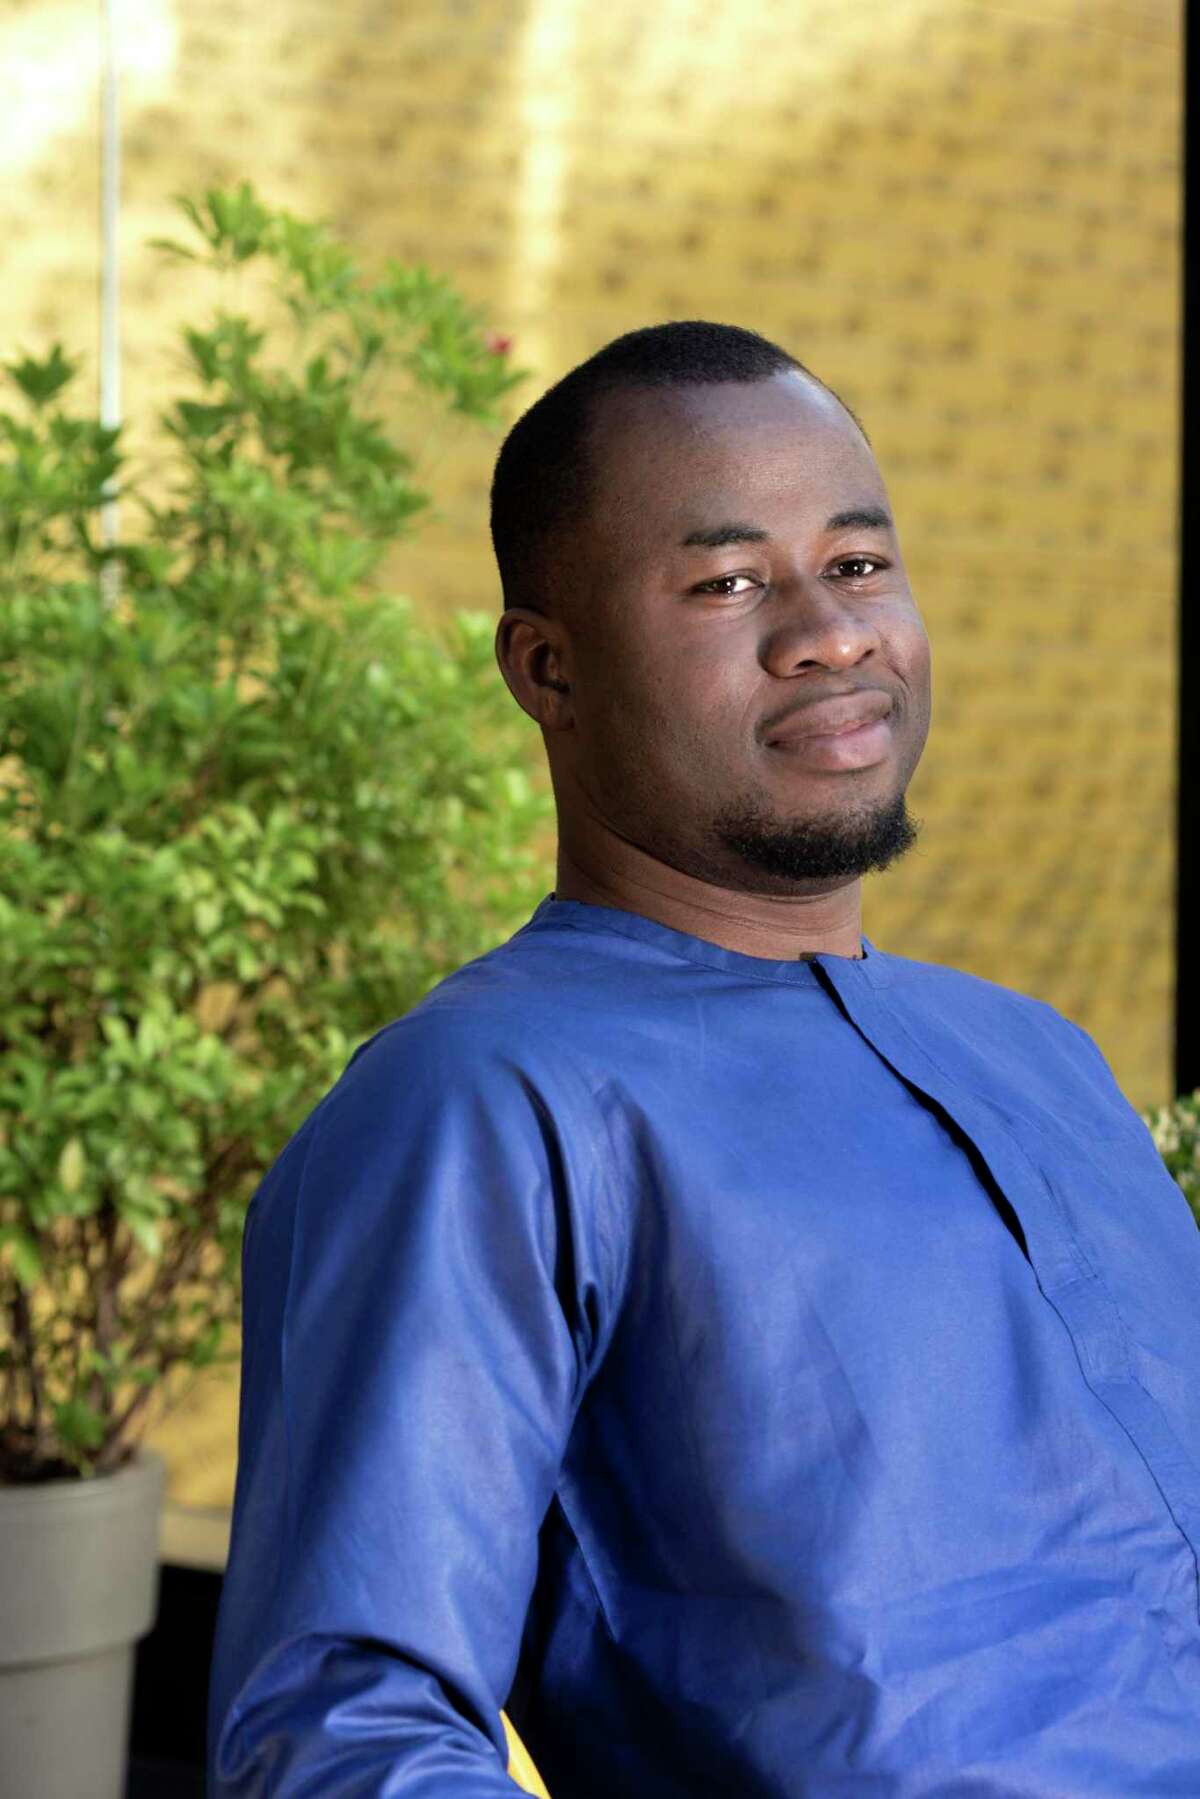 Author Chigozie Obioma published his second novel, An Orchestra of Minorities, in 2019